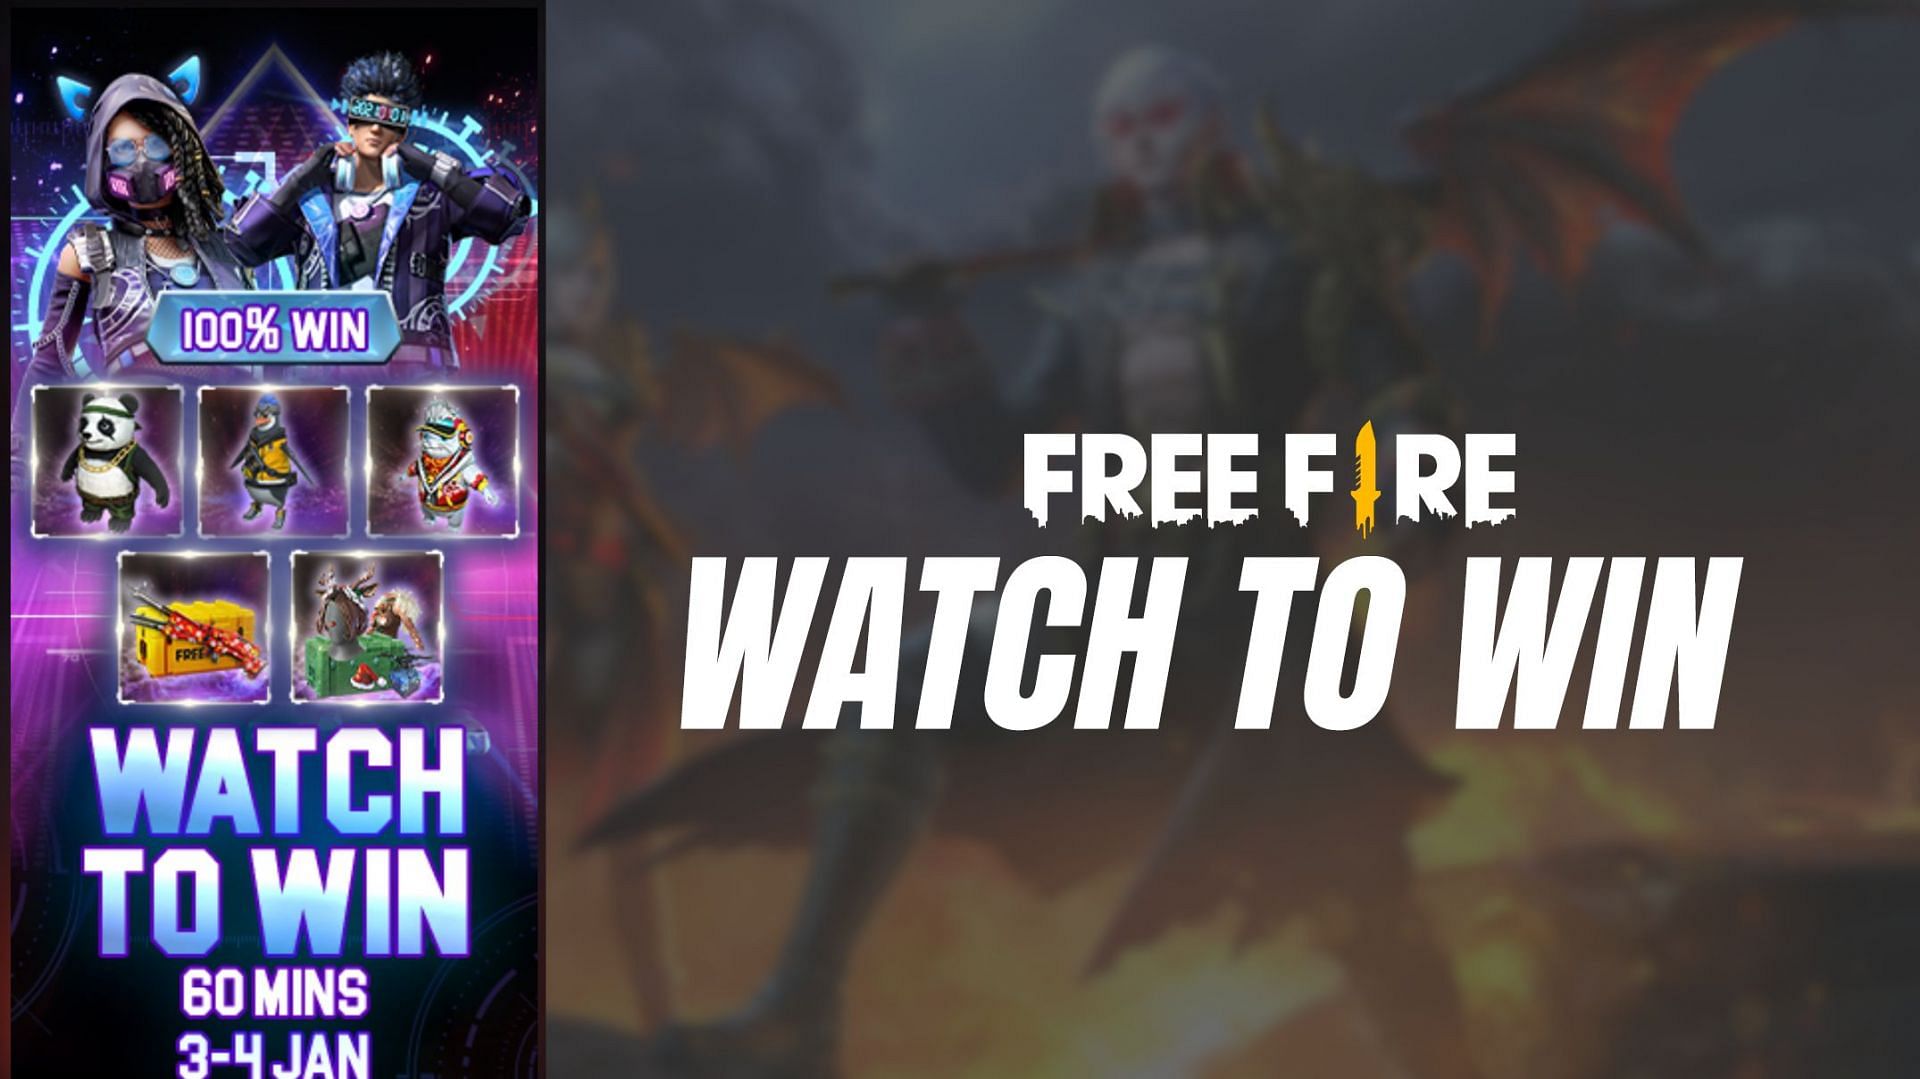 The event gives free rewards to the players in Free Fire (Image via Sportskeeda)